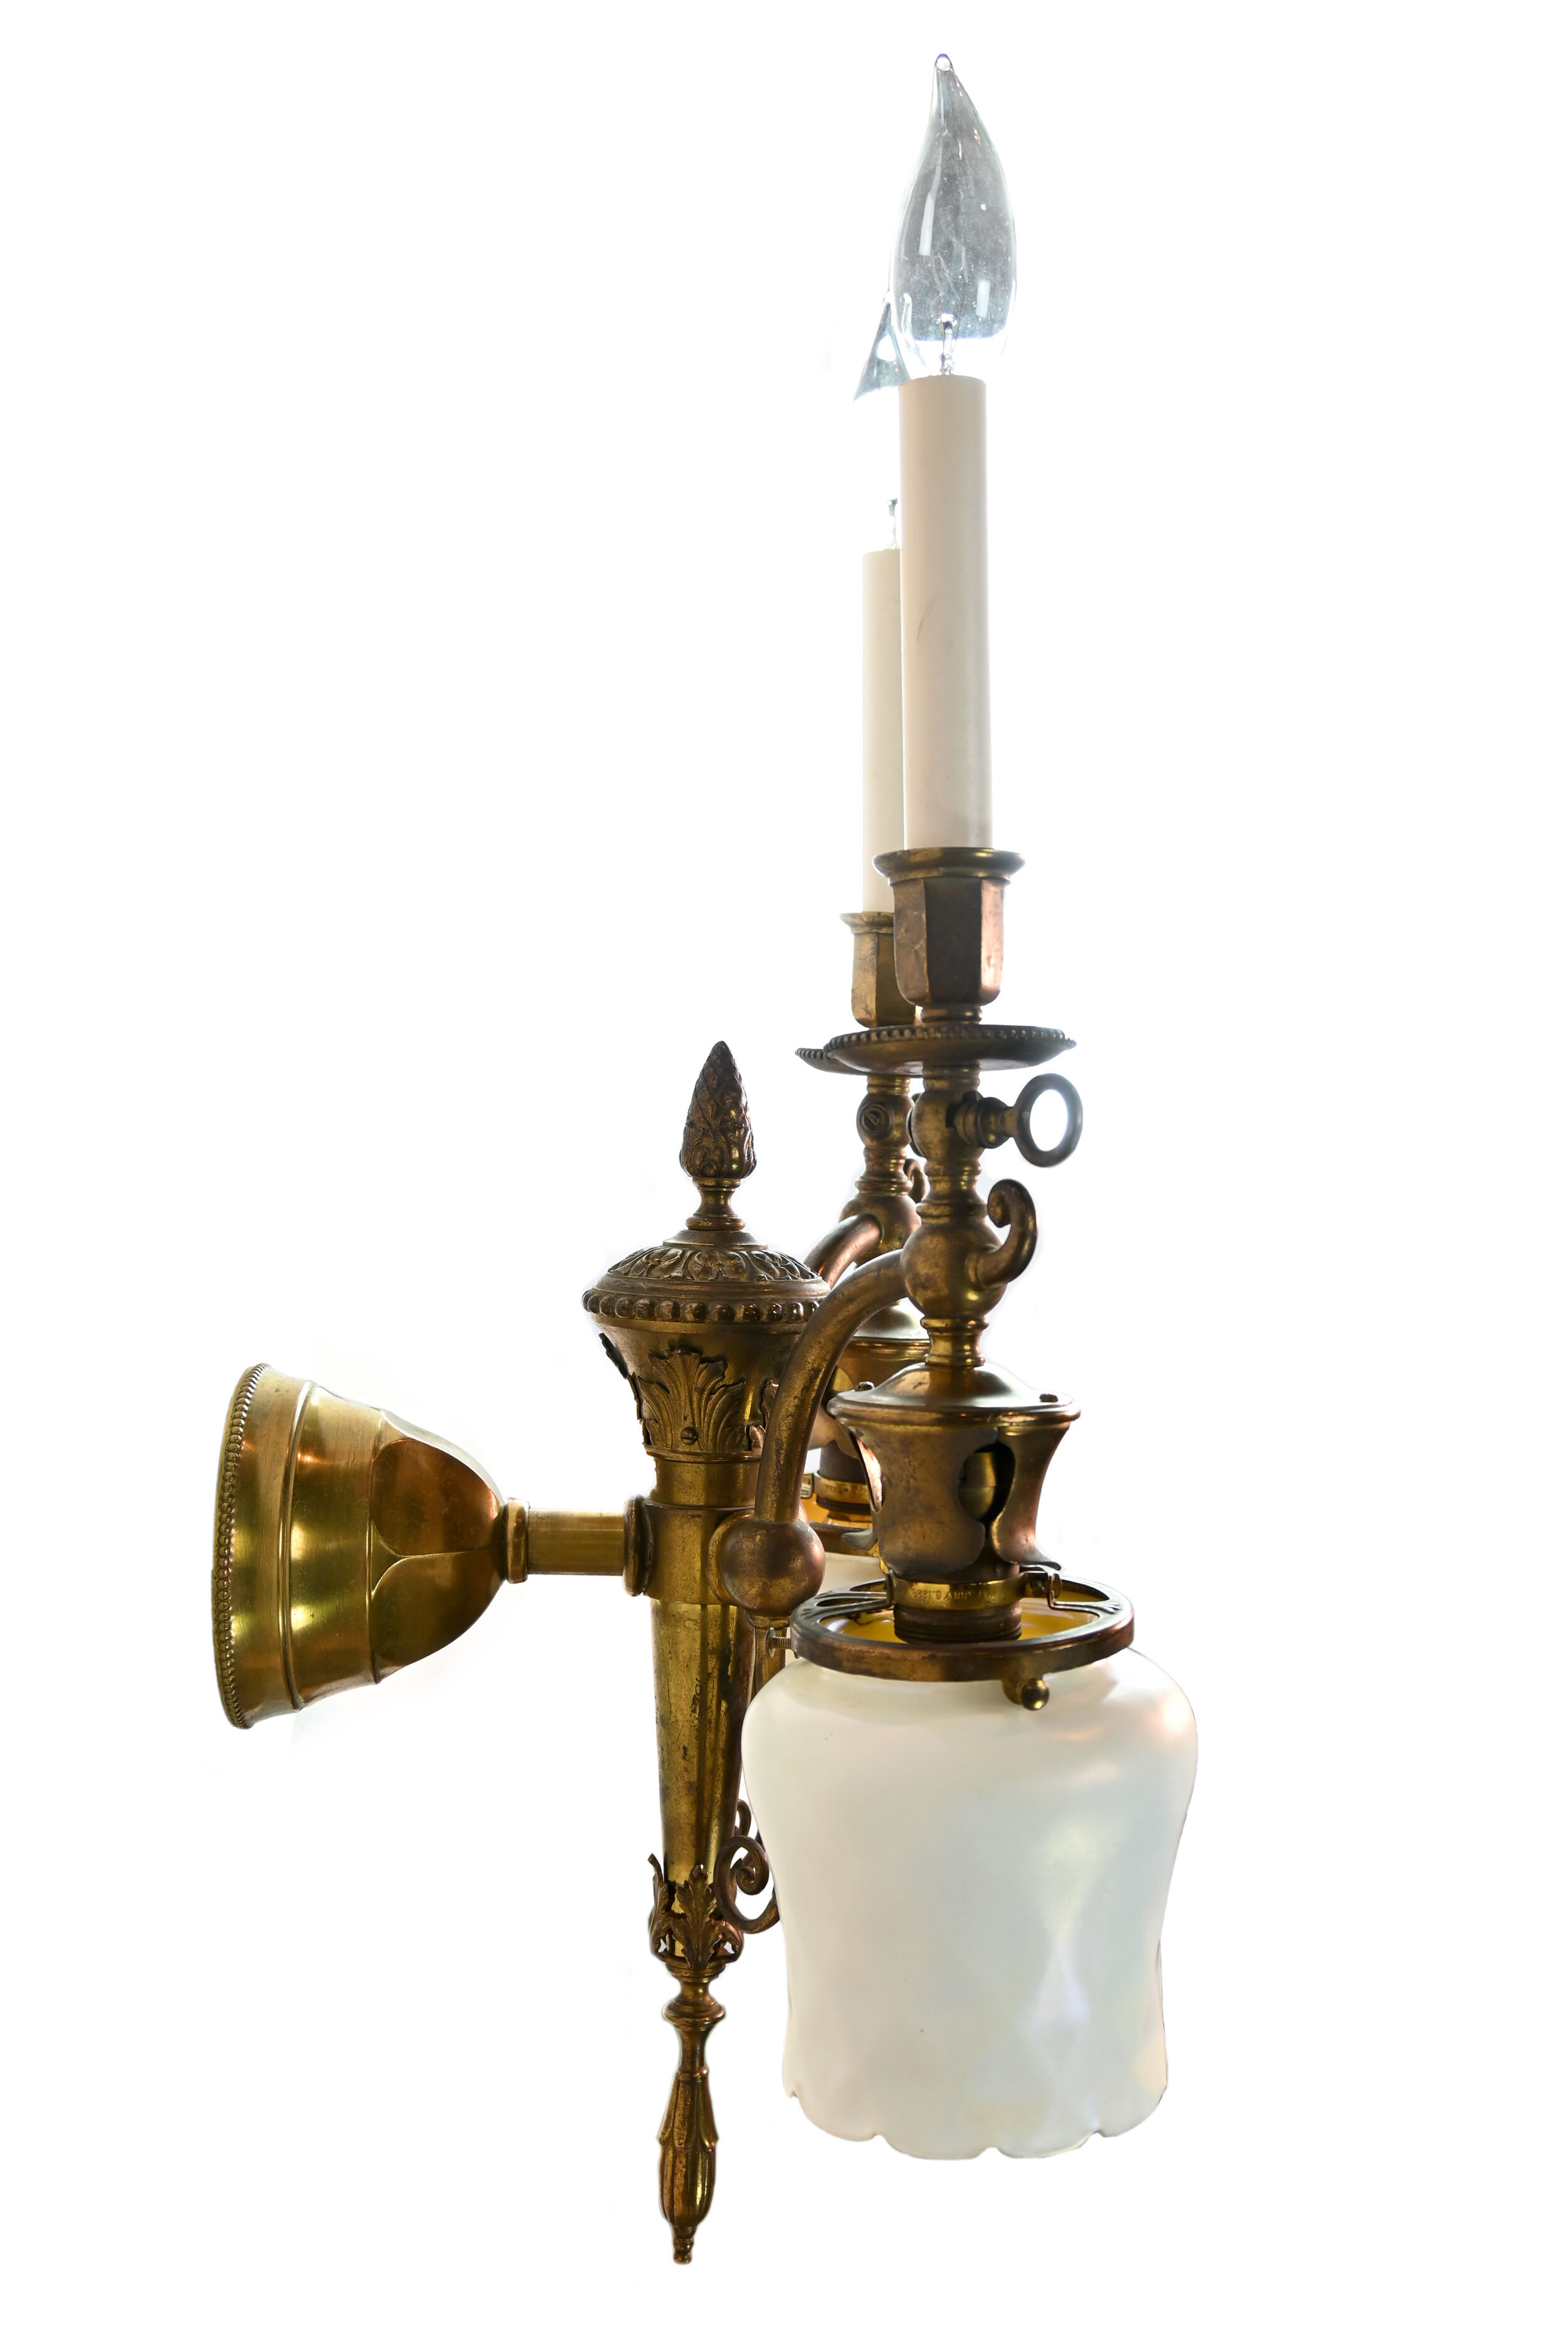 49813-gas-elec-torchiere-sconce-w-3-in-quezal-shades-2.jpg